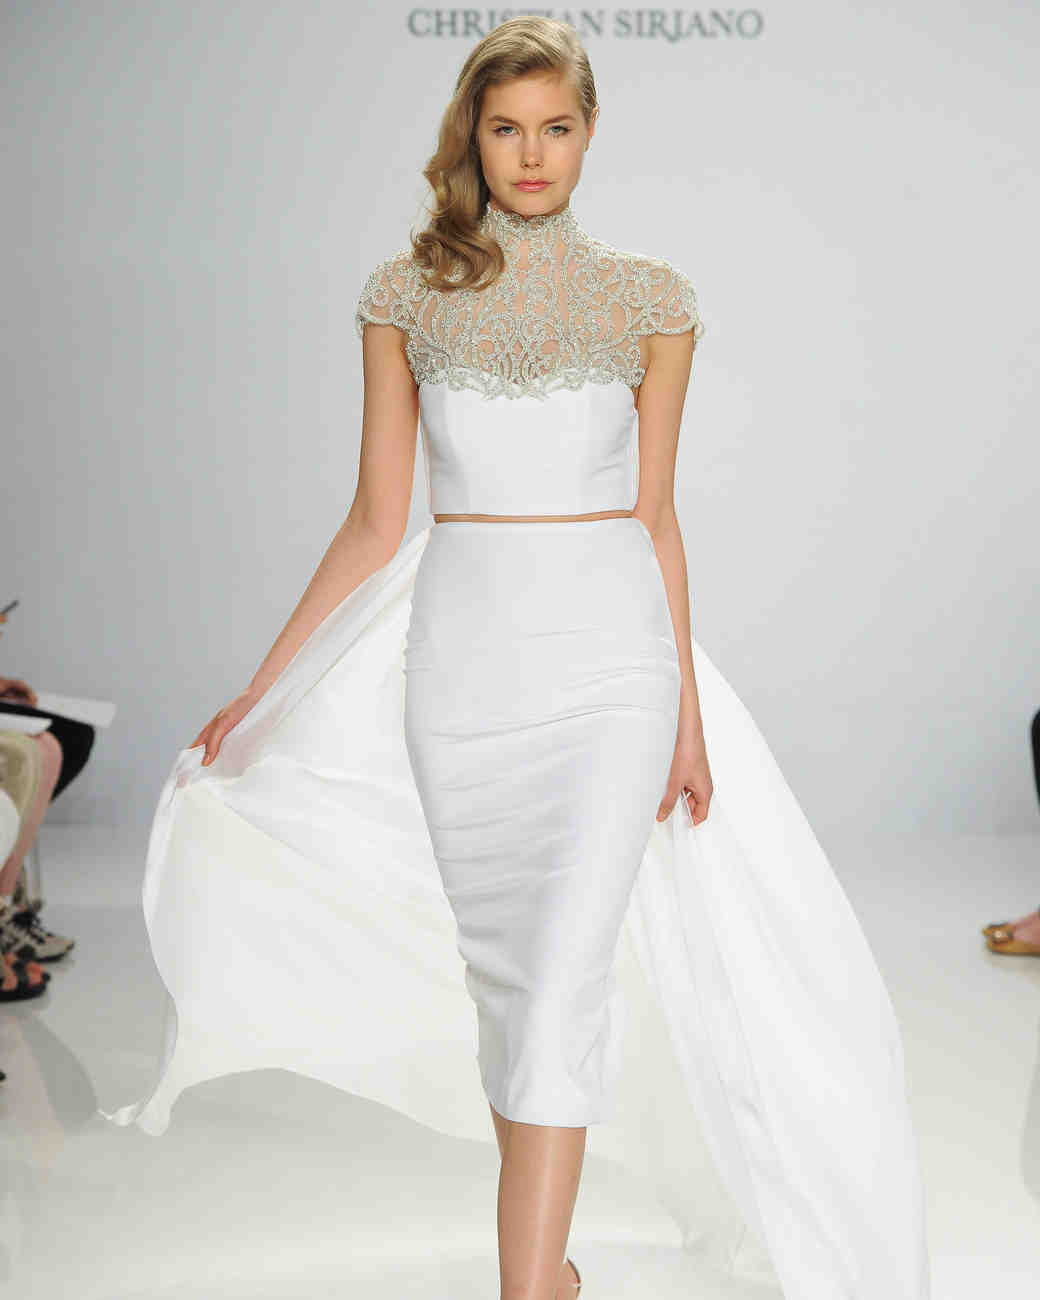 A two-pieces wedding dress